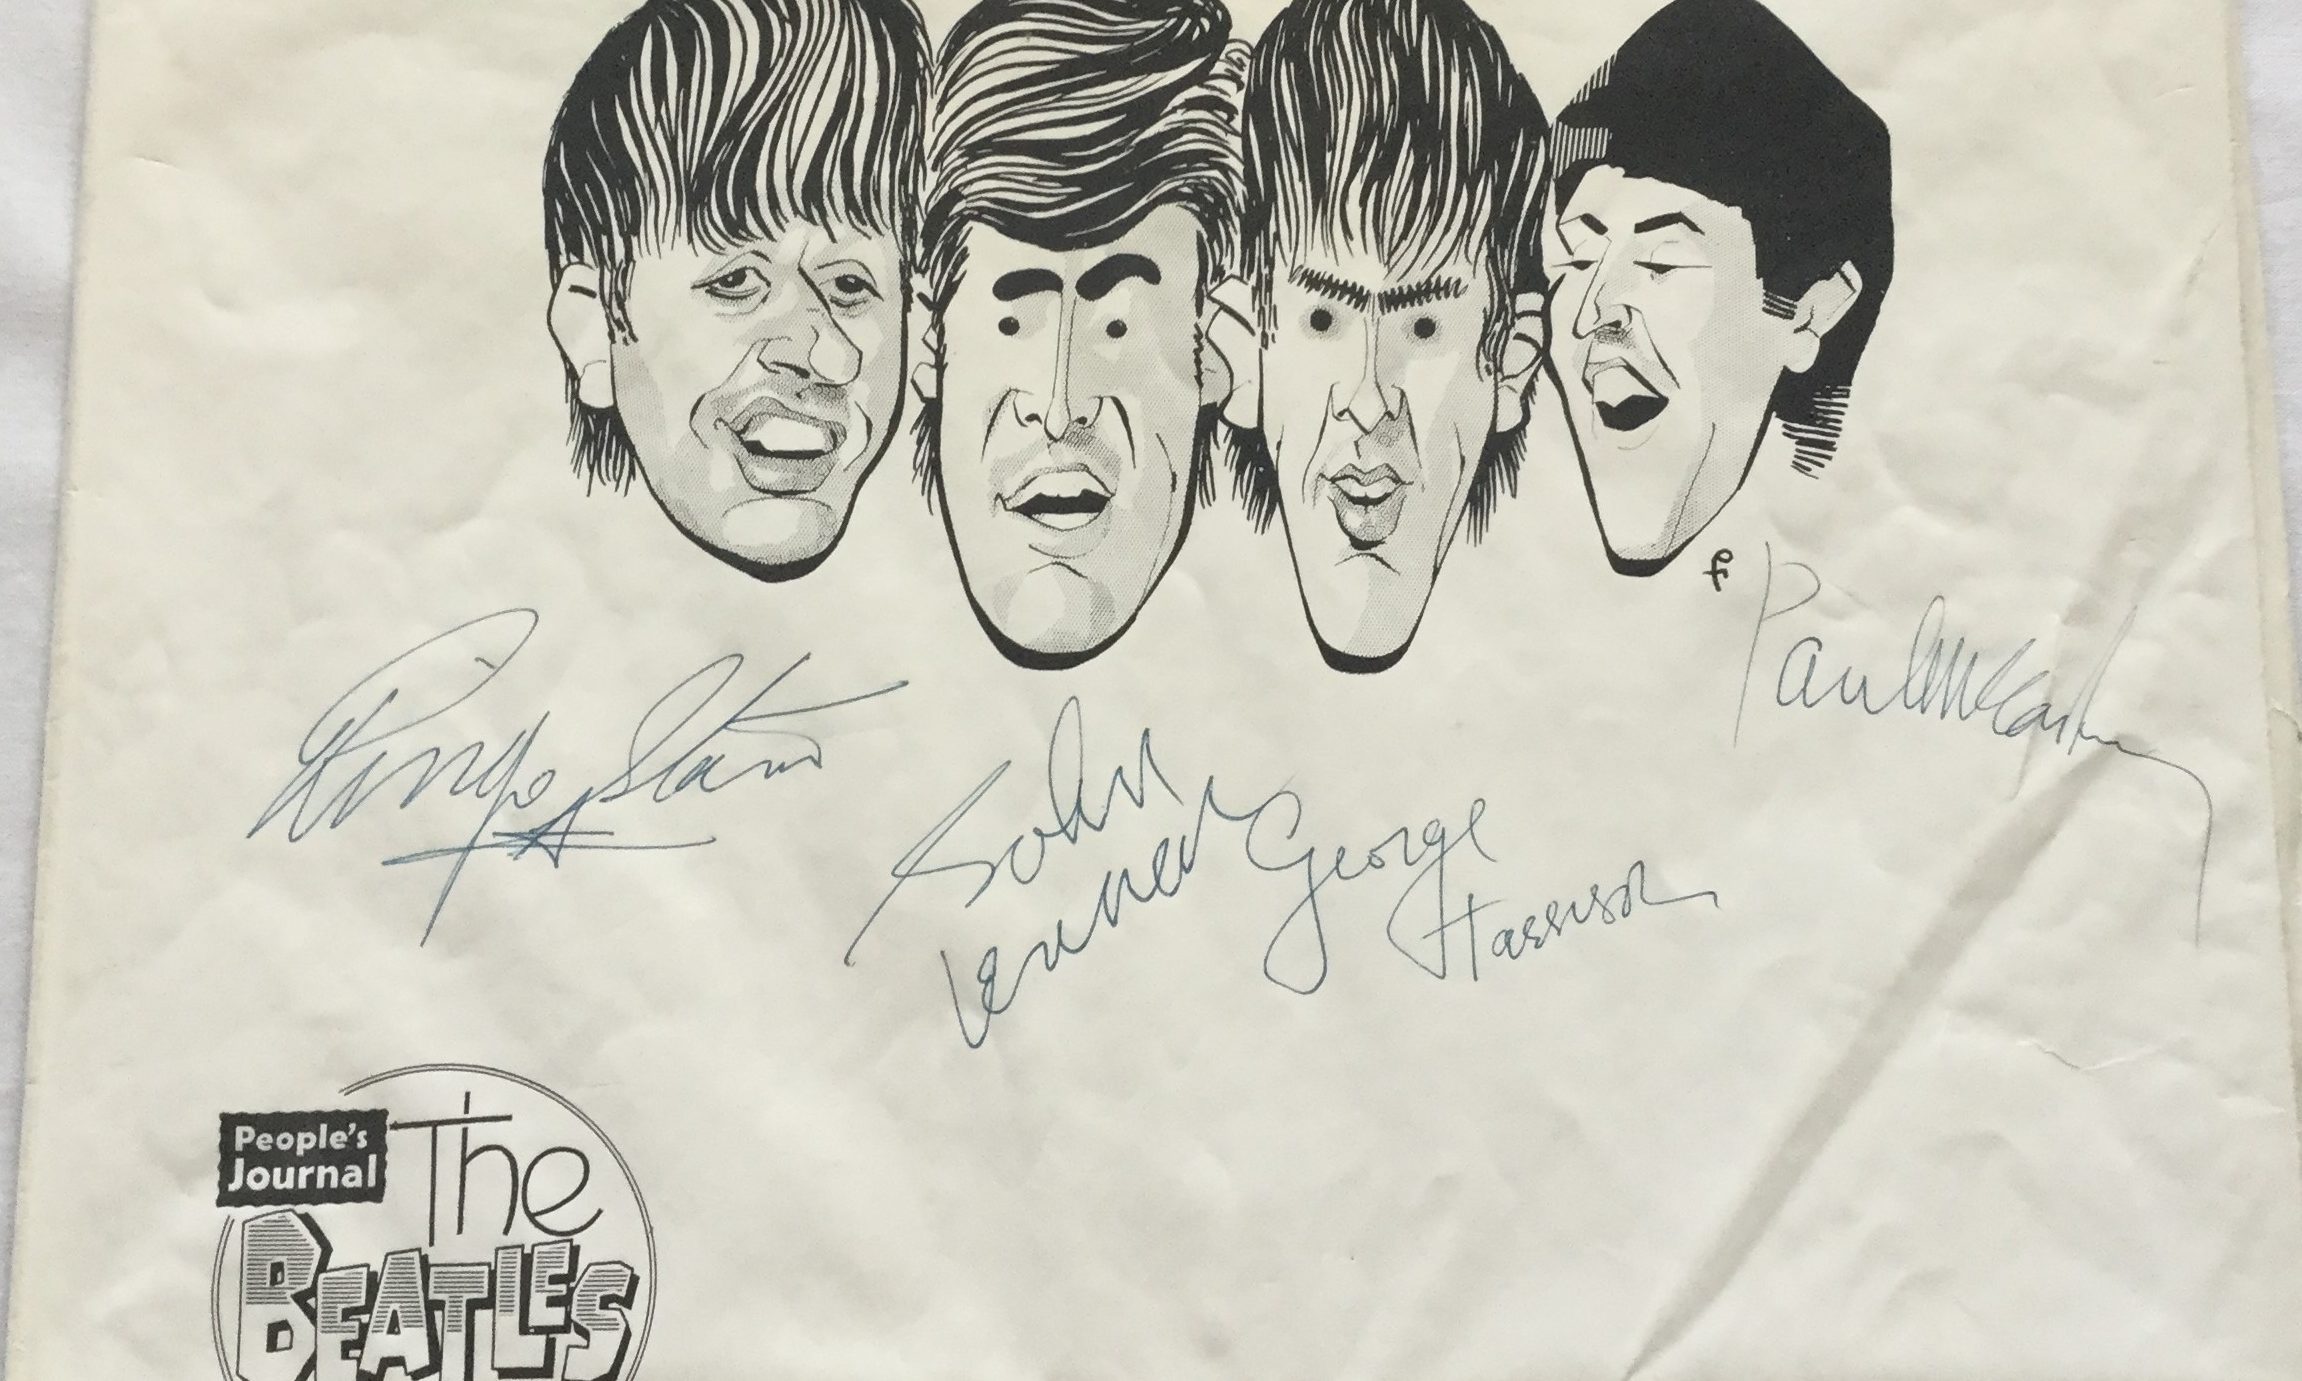 The autographed caricatures could fetch up to £15,000.